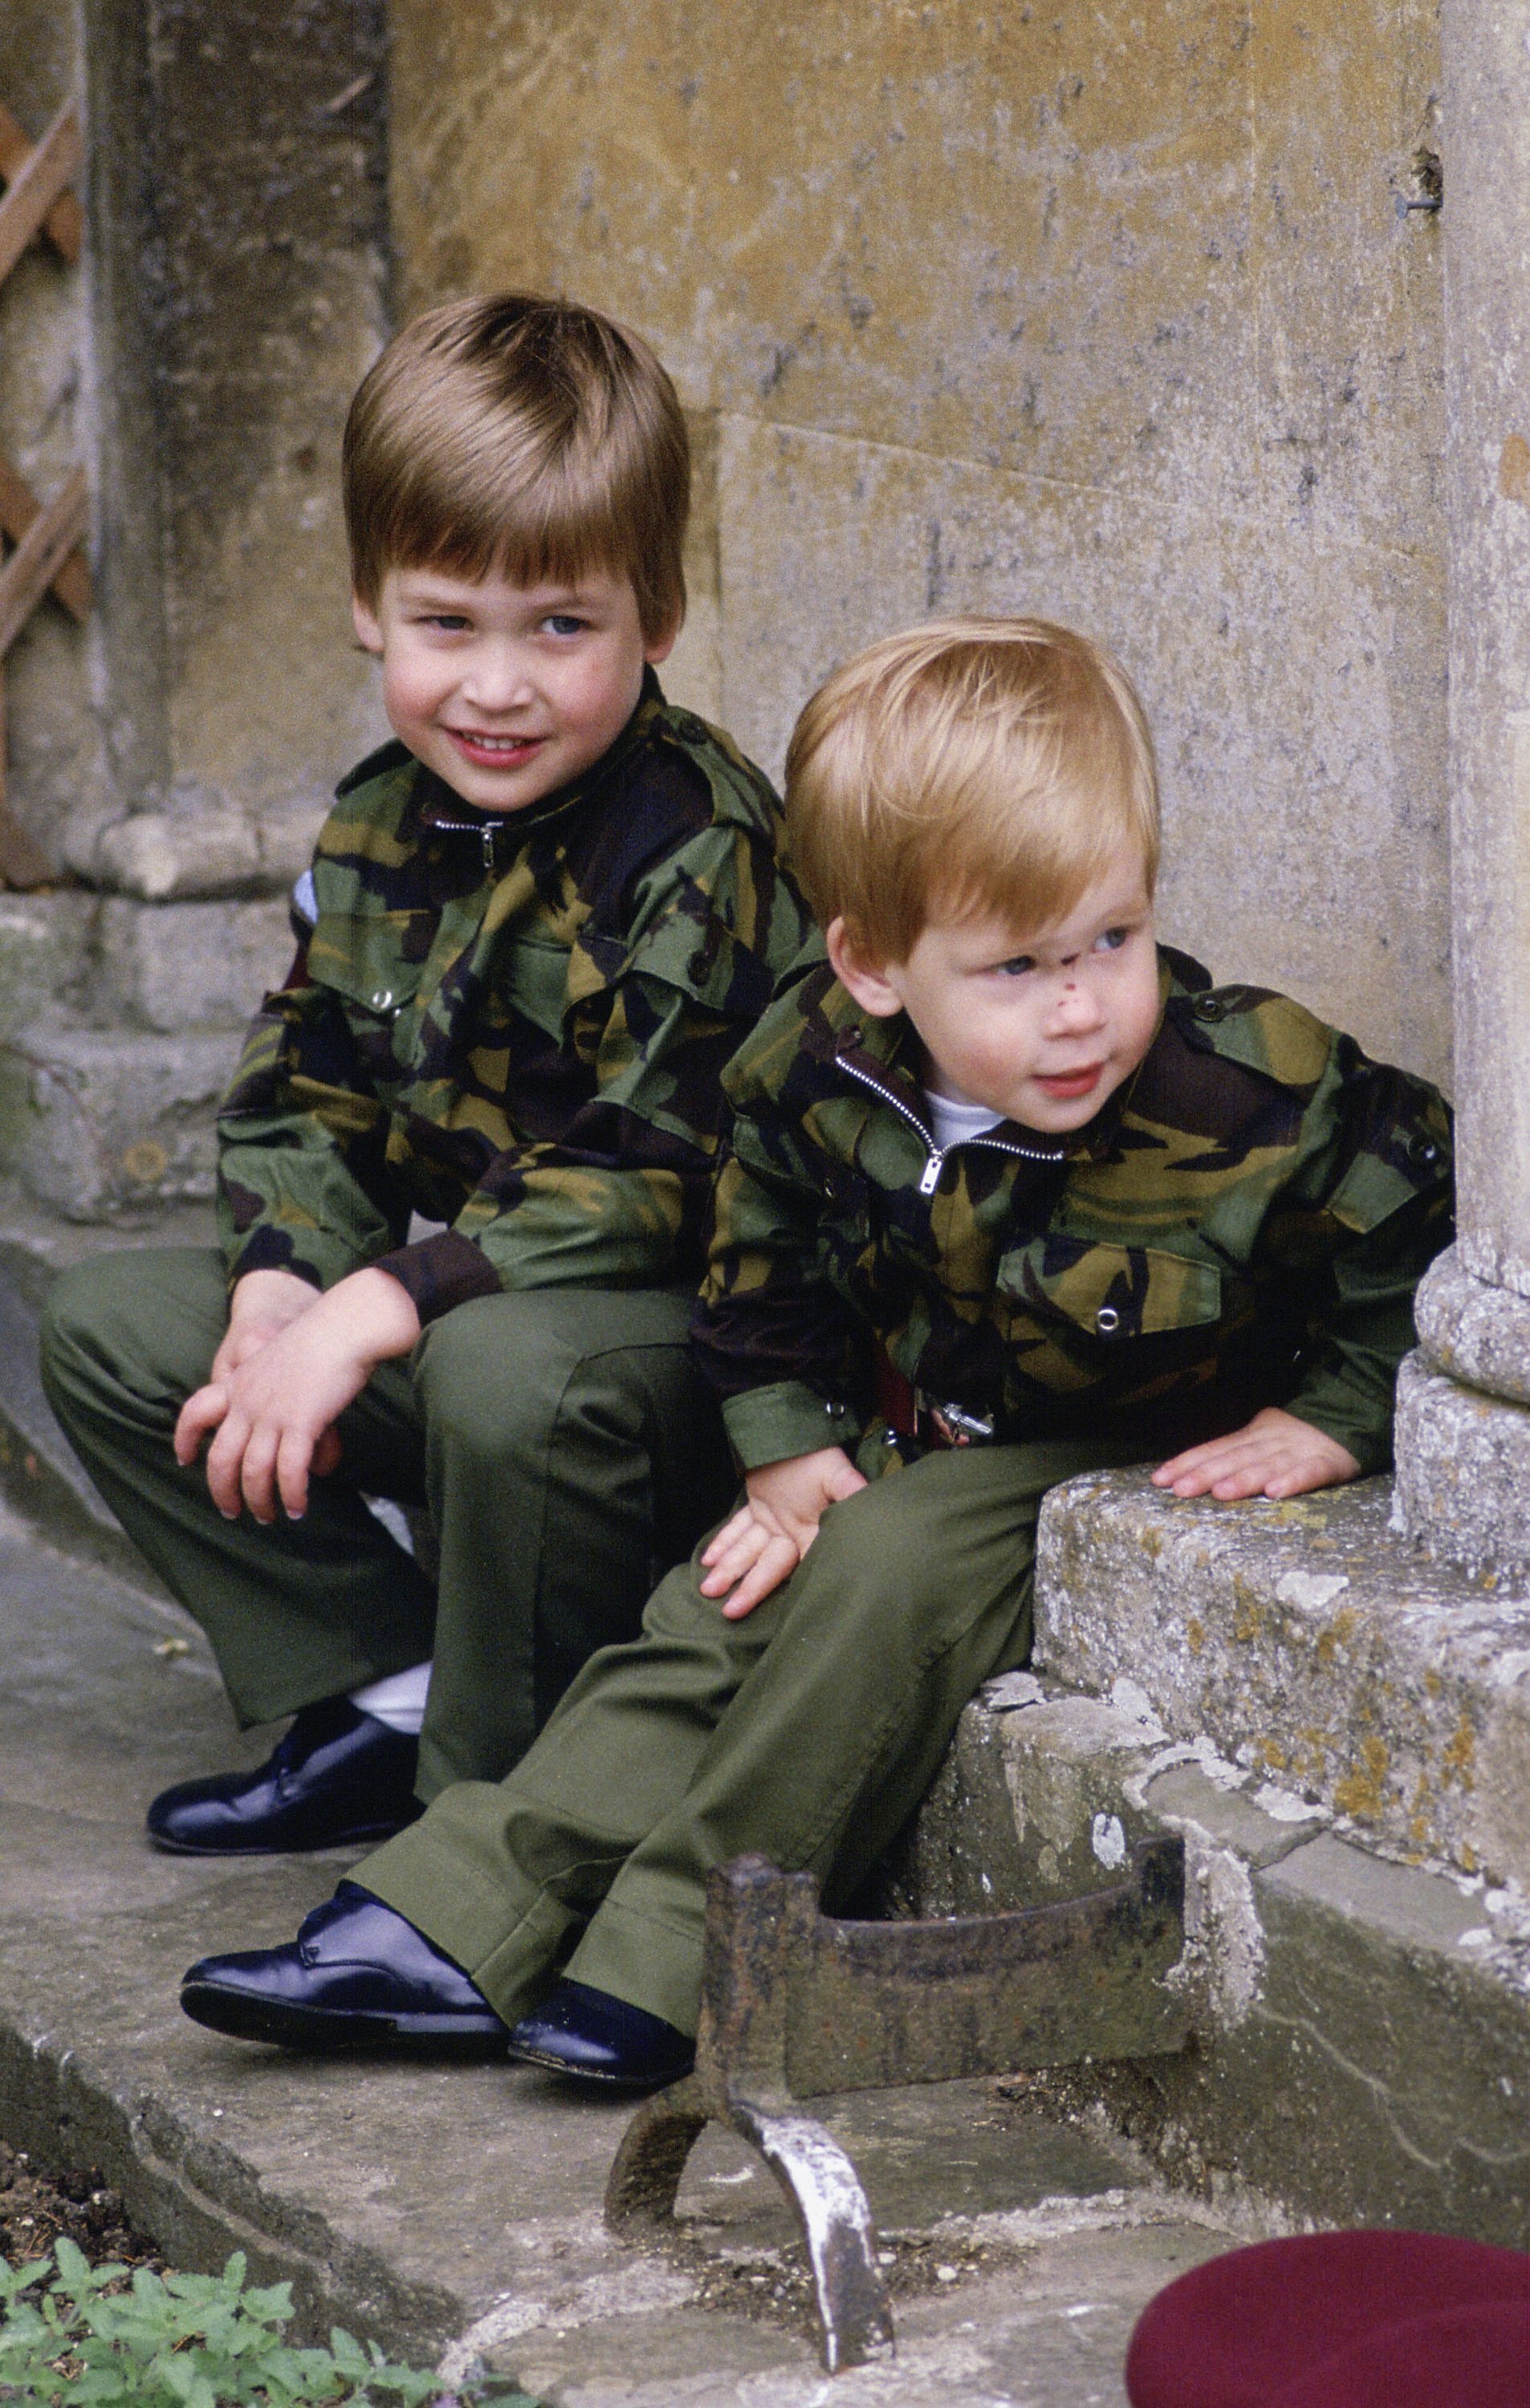 Prince Harry and Prince William pictured sitting together on the steps of Highgrove House on July 18, 1986 in Tetbury, England. | Source: Getty Images